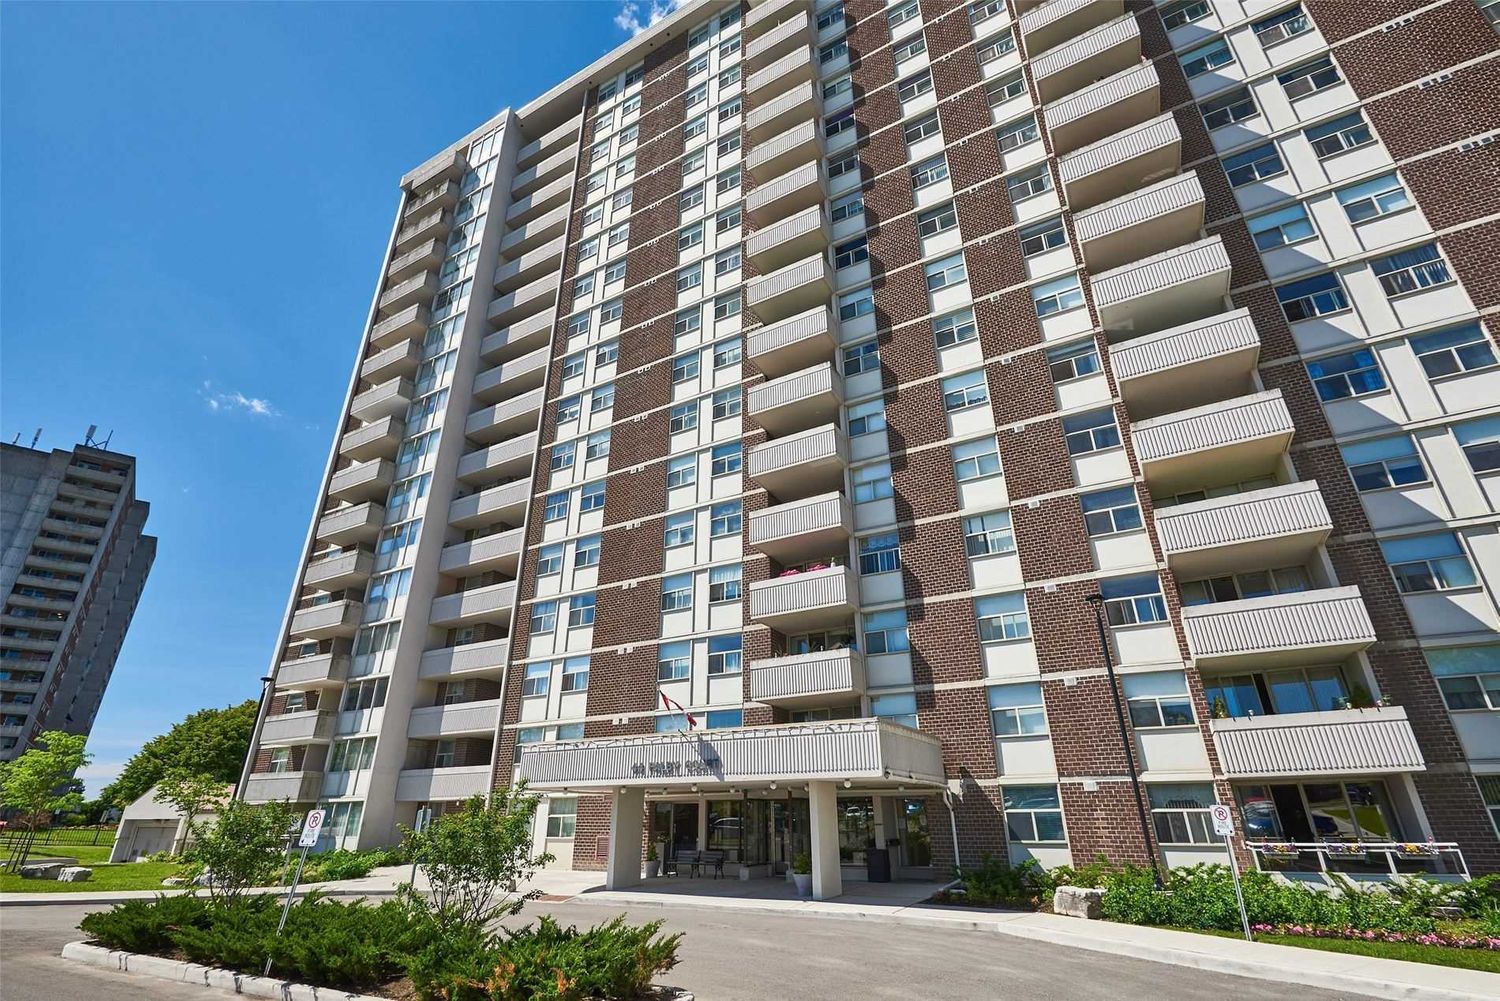 44 Falby Court. 44 Falby Court Condos is located in  Ajax, Toronto - image #2 of 2